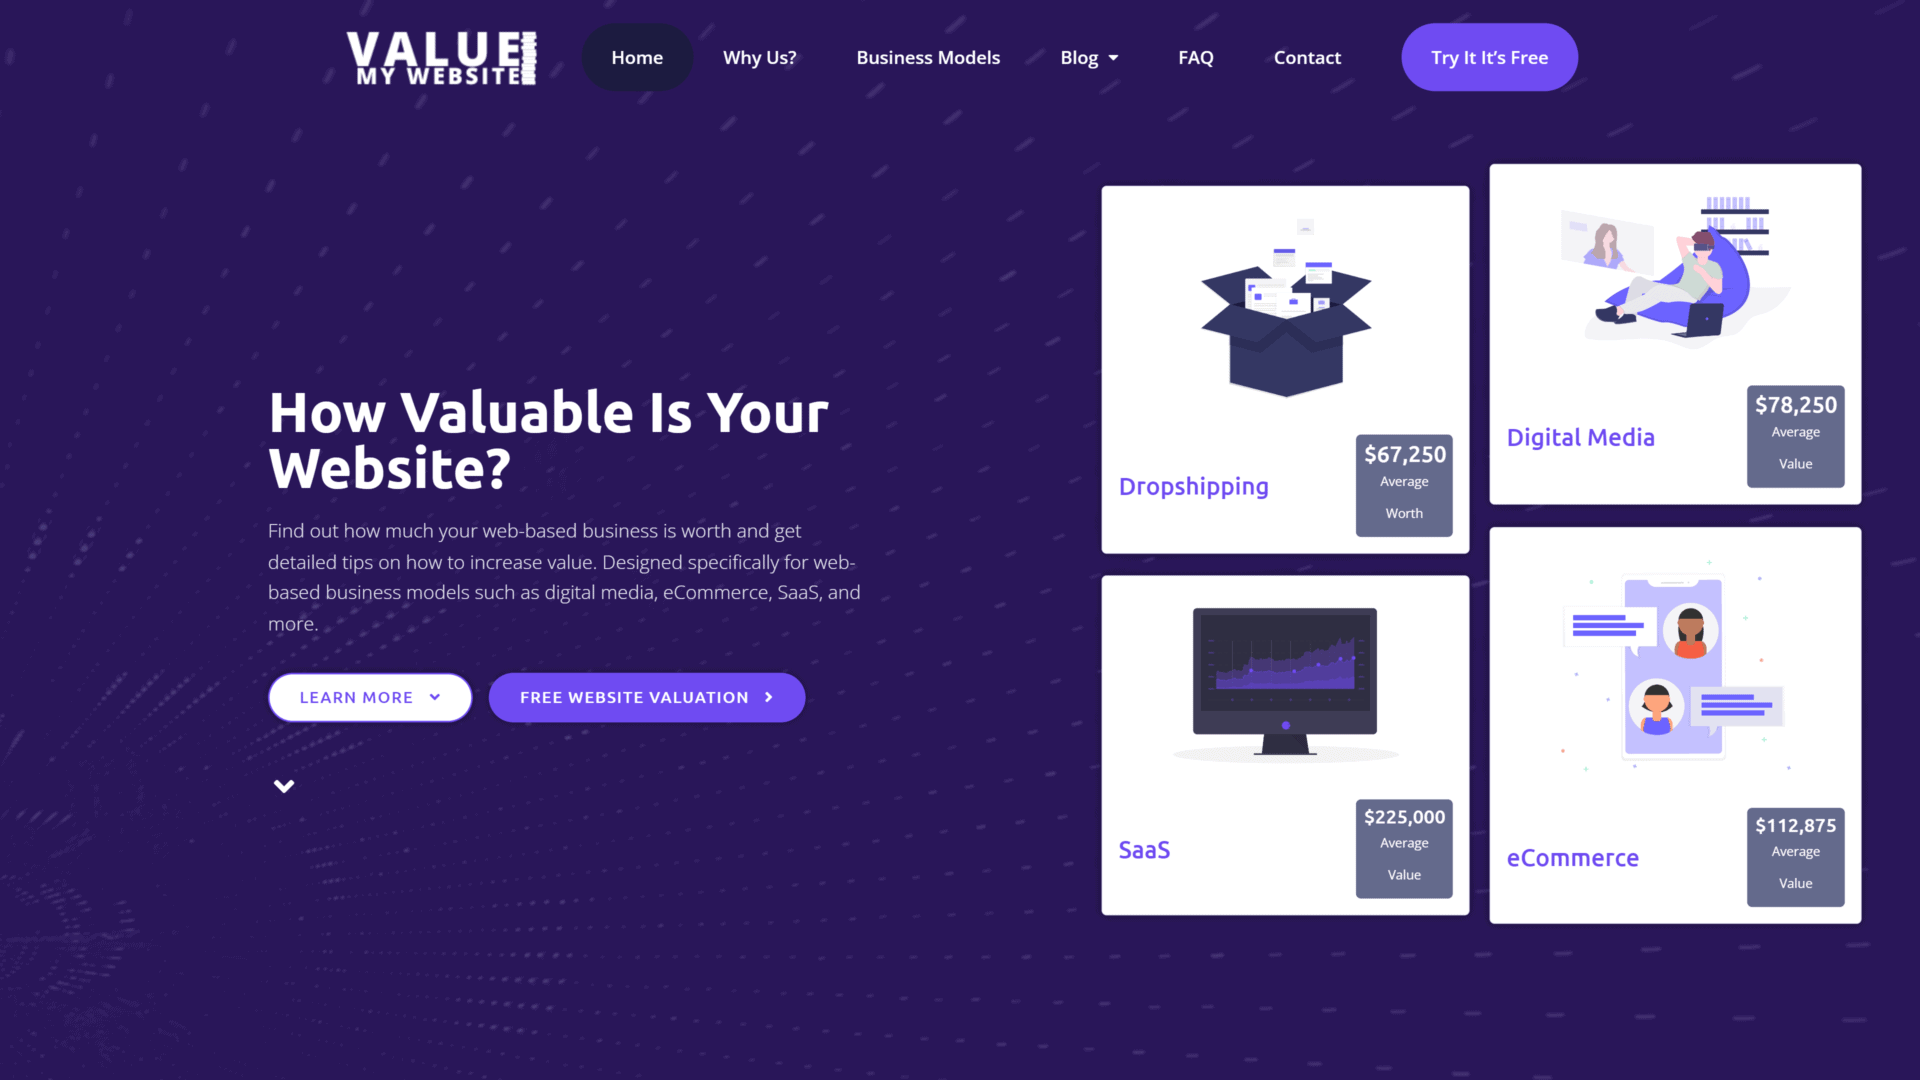 A screenshot of the value my website homepage